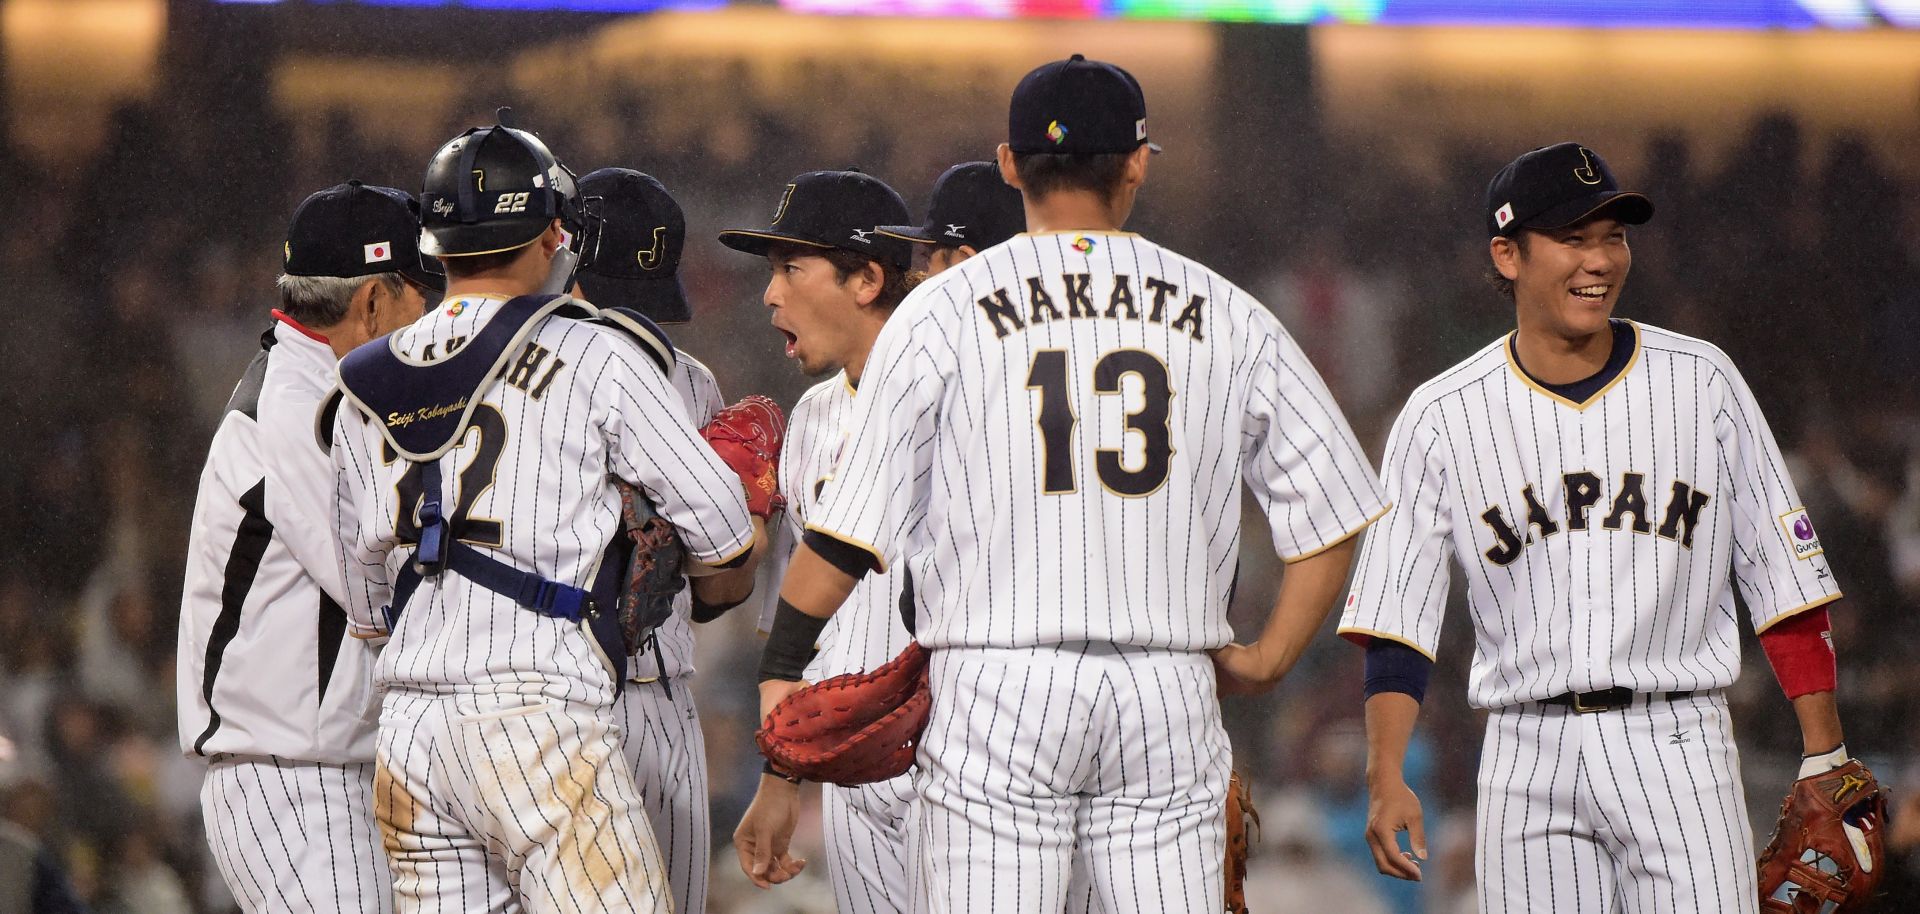 A team of Japanese players represent their country at the 2017 World Baseball Classic in 2017.